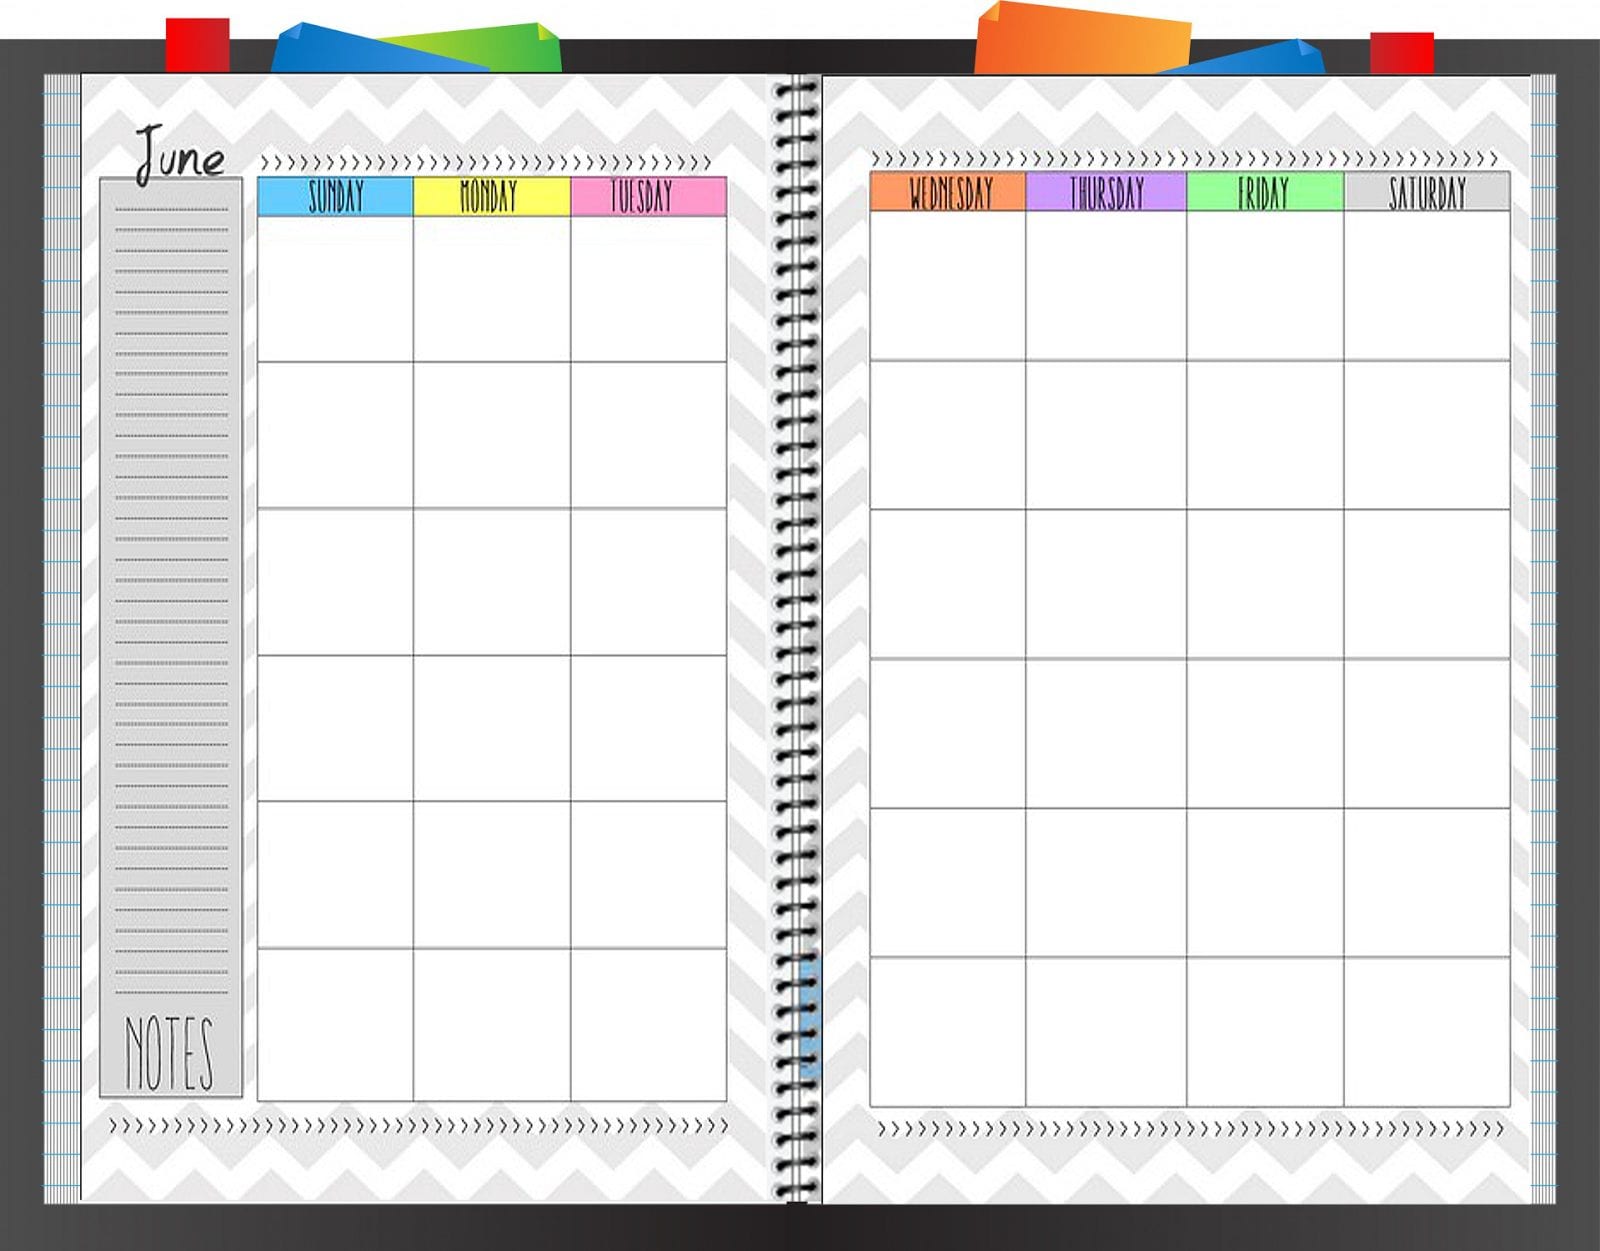 Monthly Budget Planner Template 3